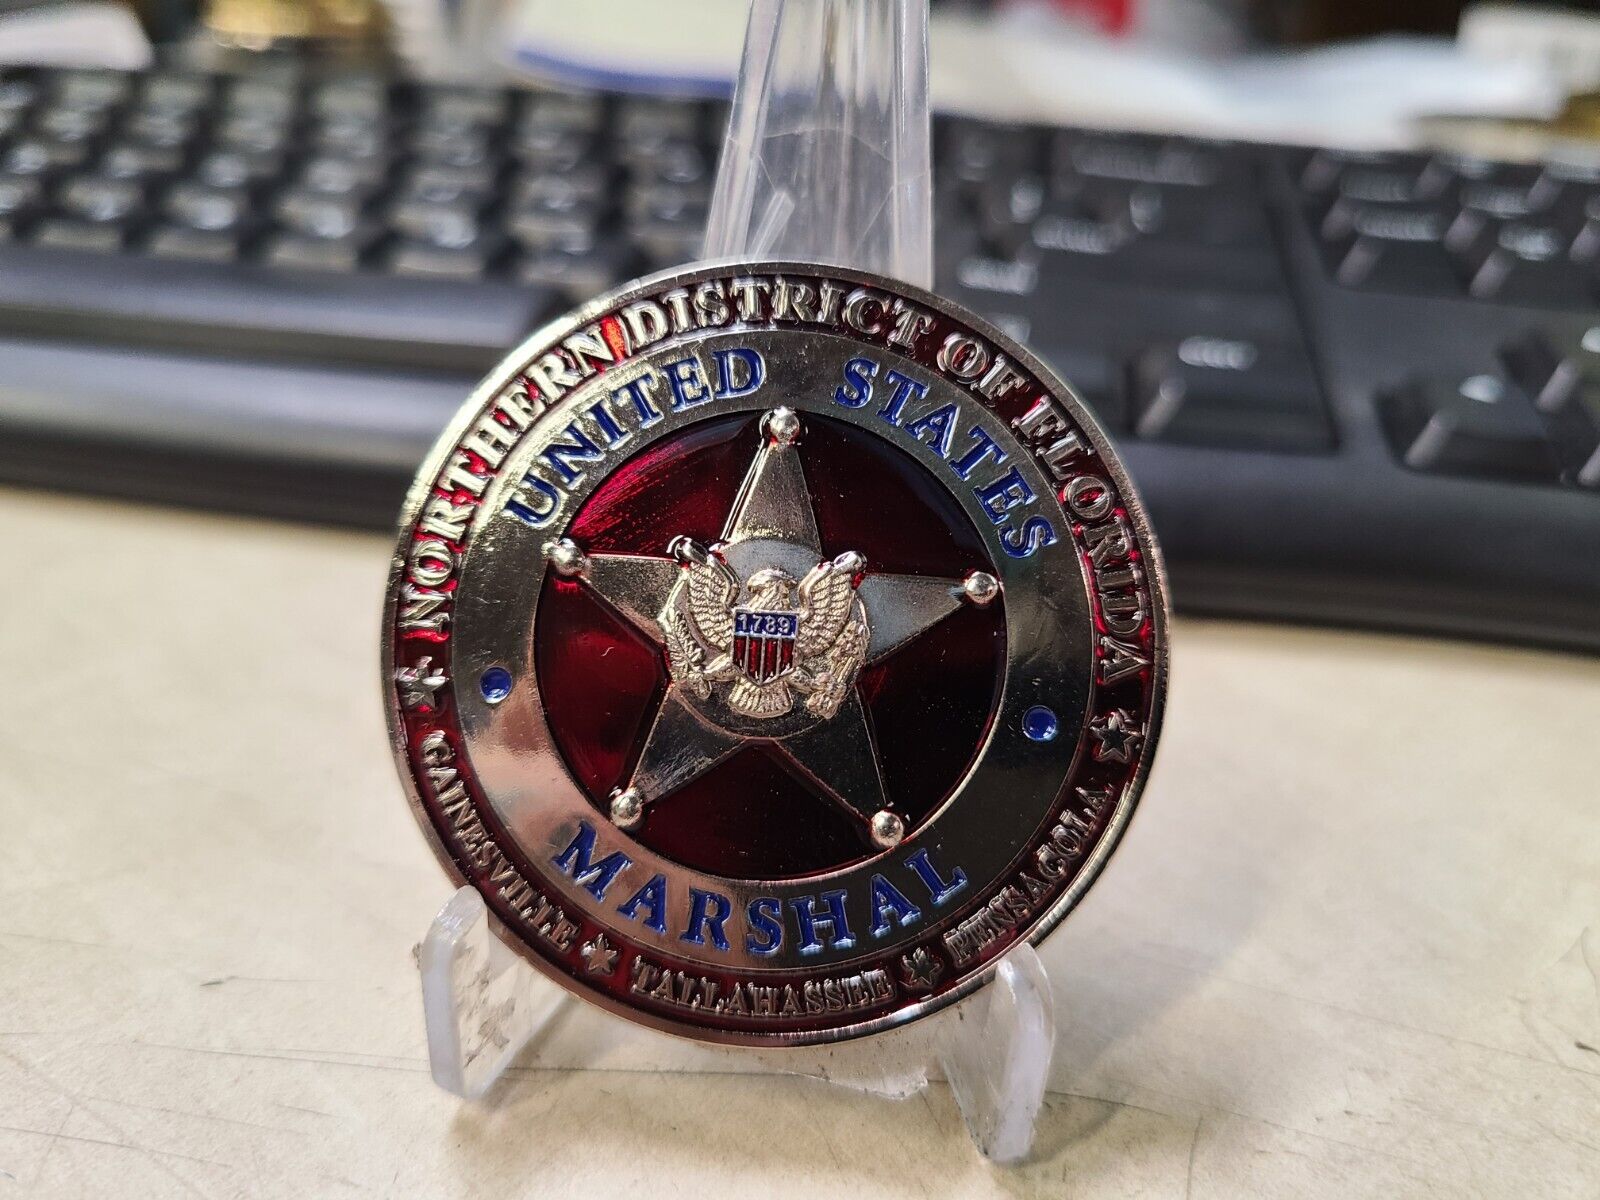 Northern District Of Florida United States Marshal Challenge Coin